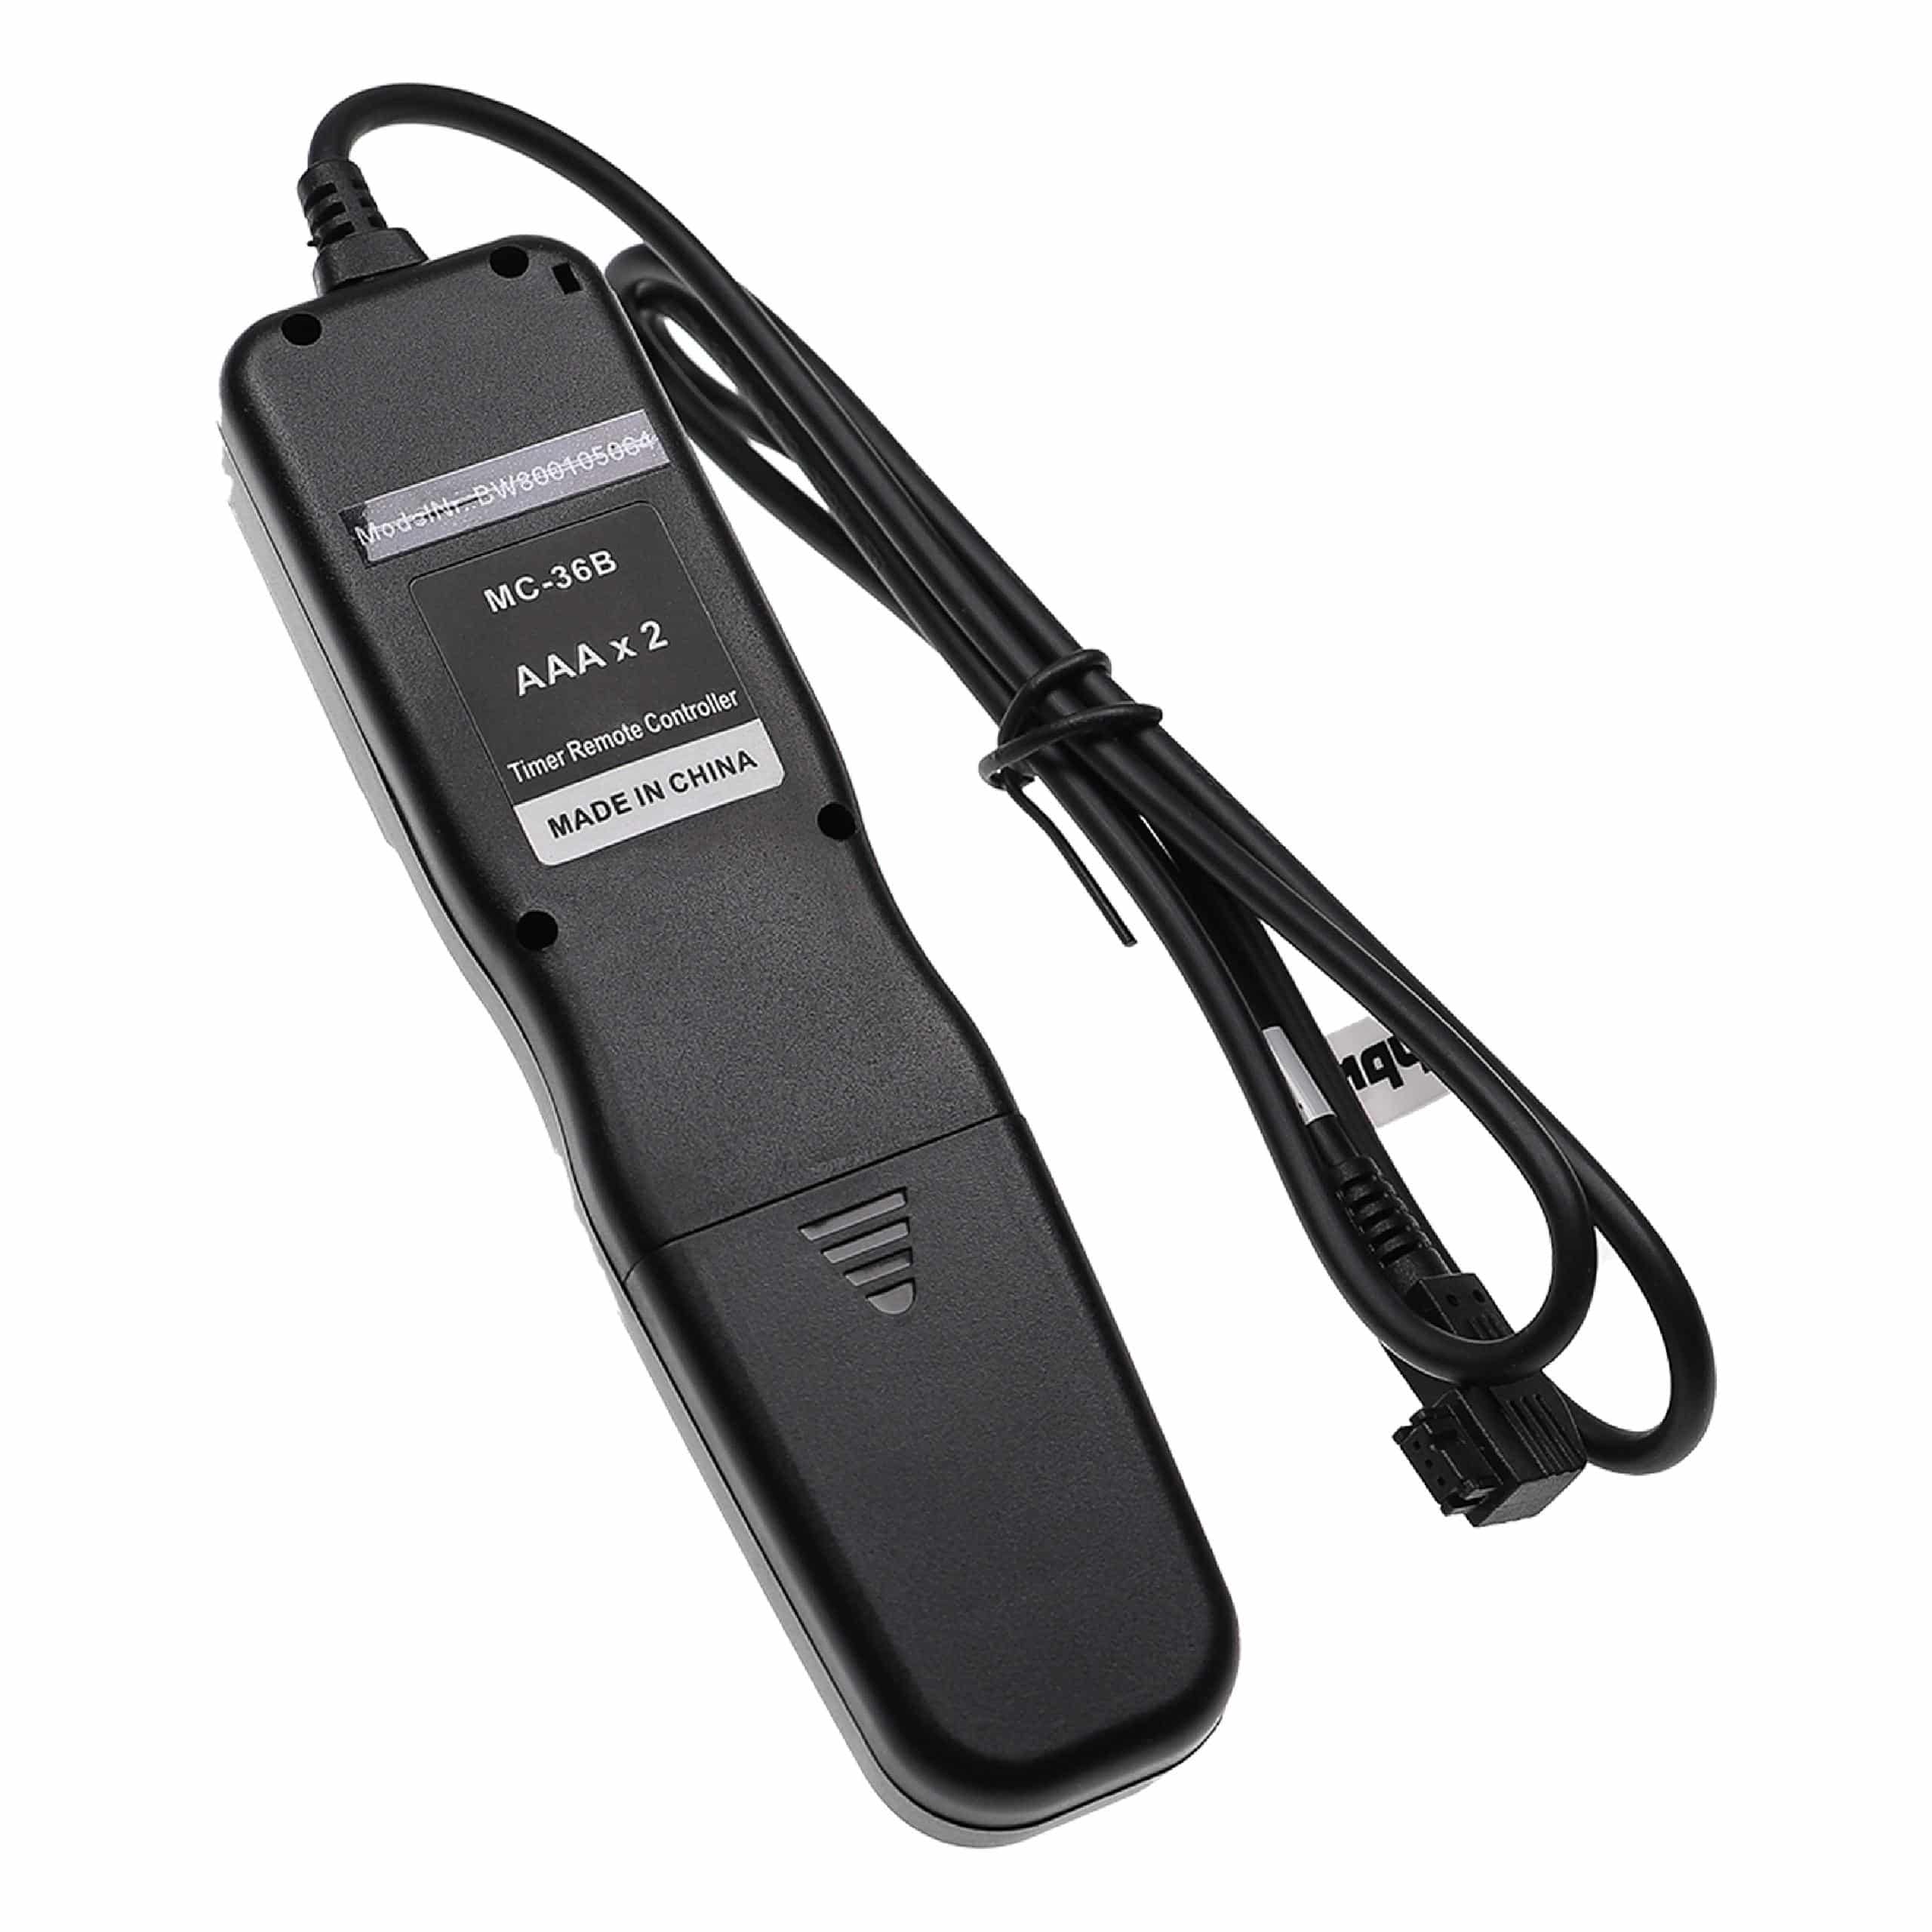 Remote Trigger as Exchange for Konica Minolta RC-1000L for Camera etc. + Timer, 2-Step Shutter, 1 m Lead